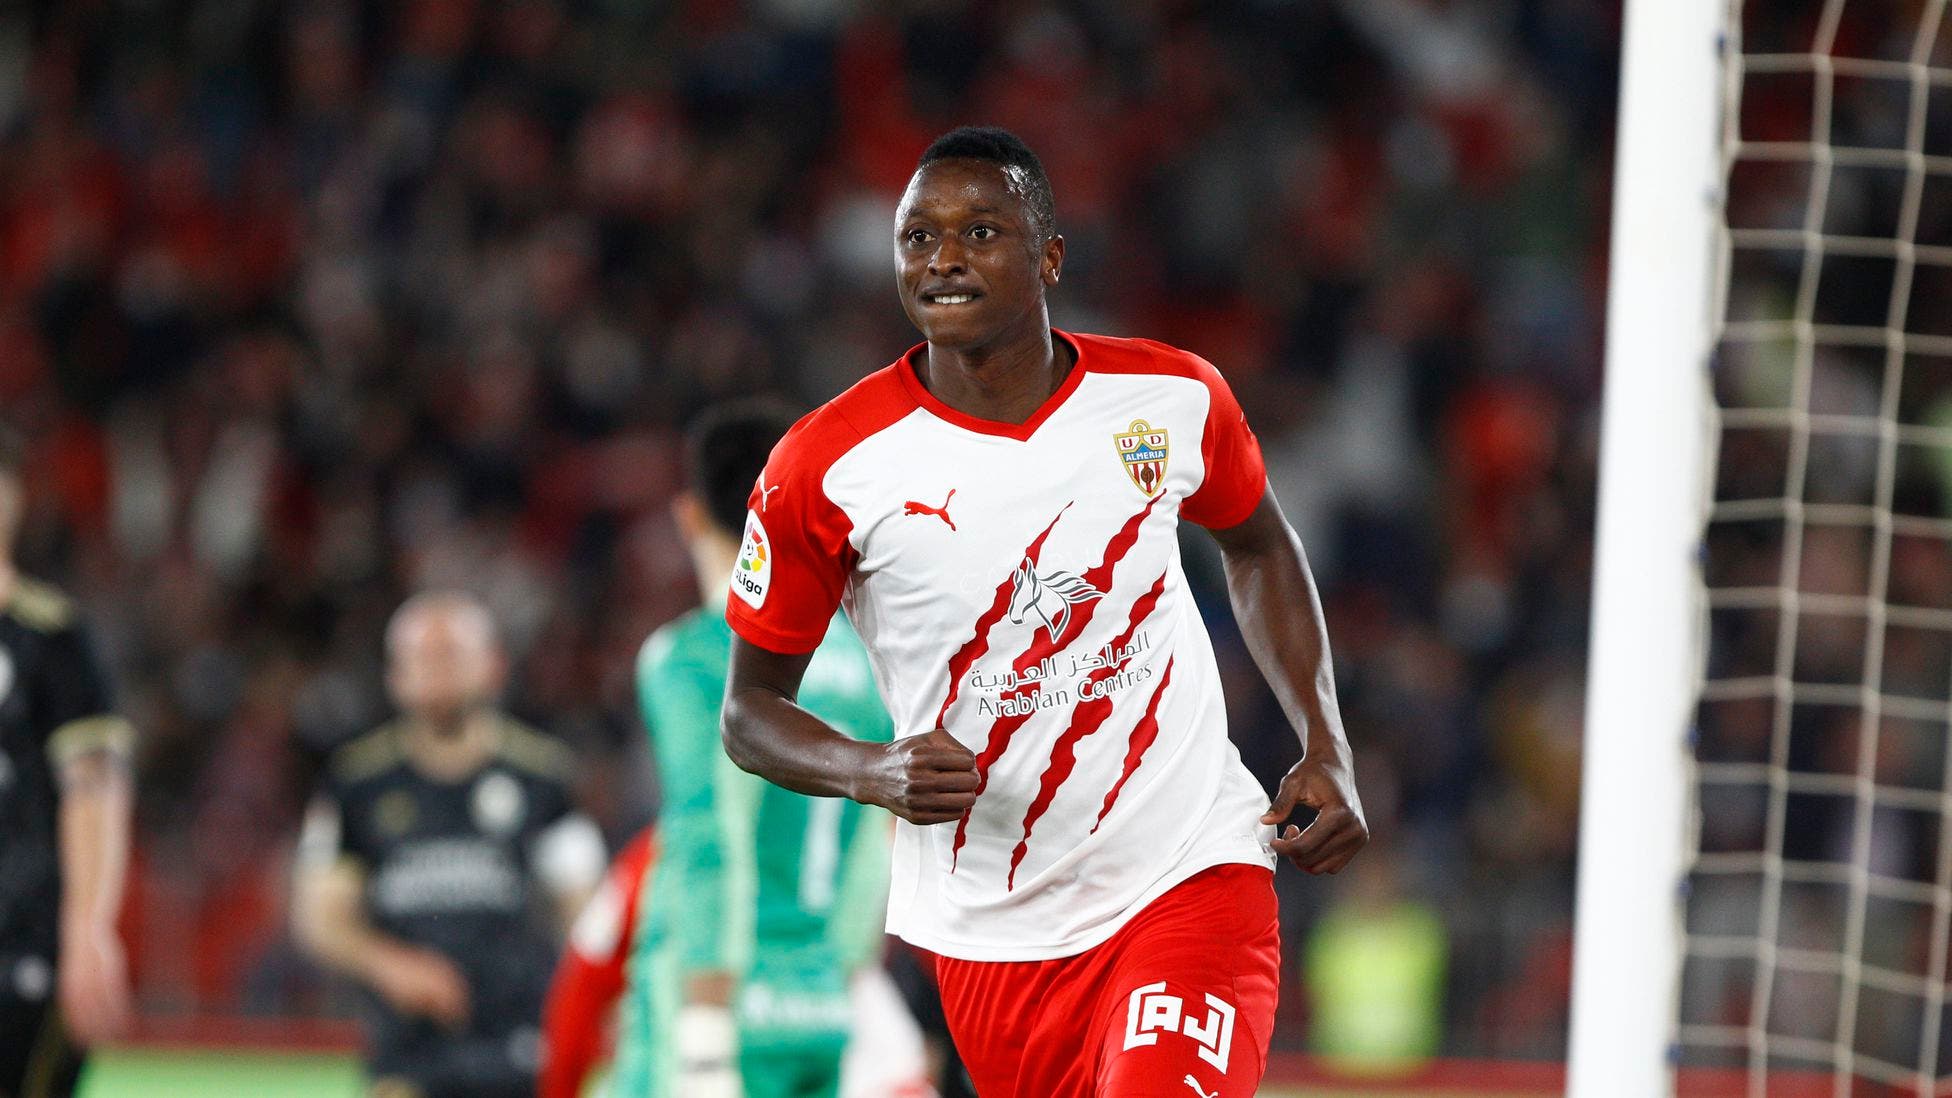 2 renowned signings at UD Almería to replace Umar Sadiq
